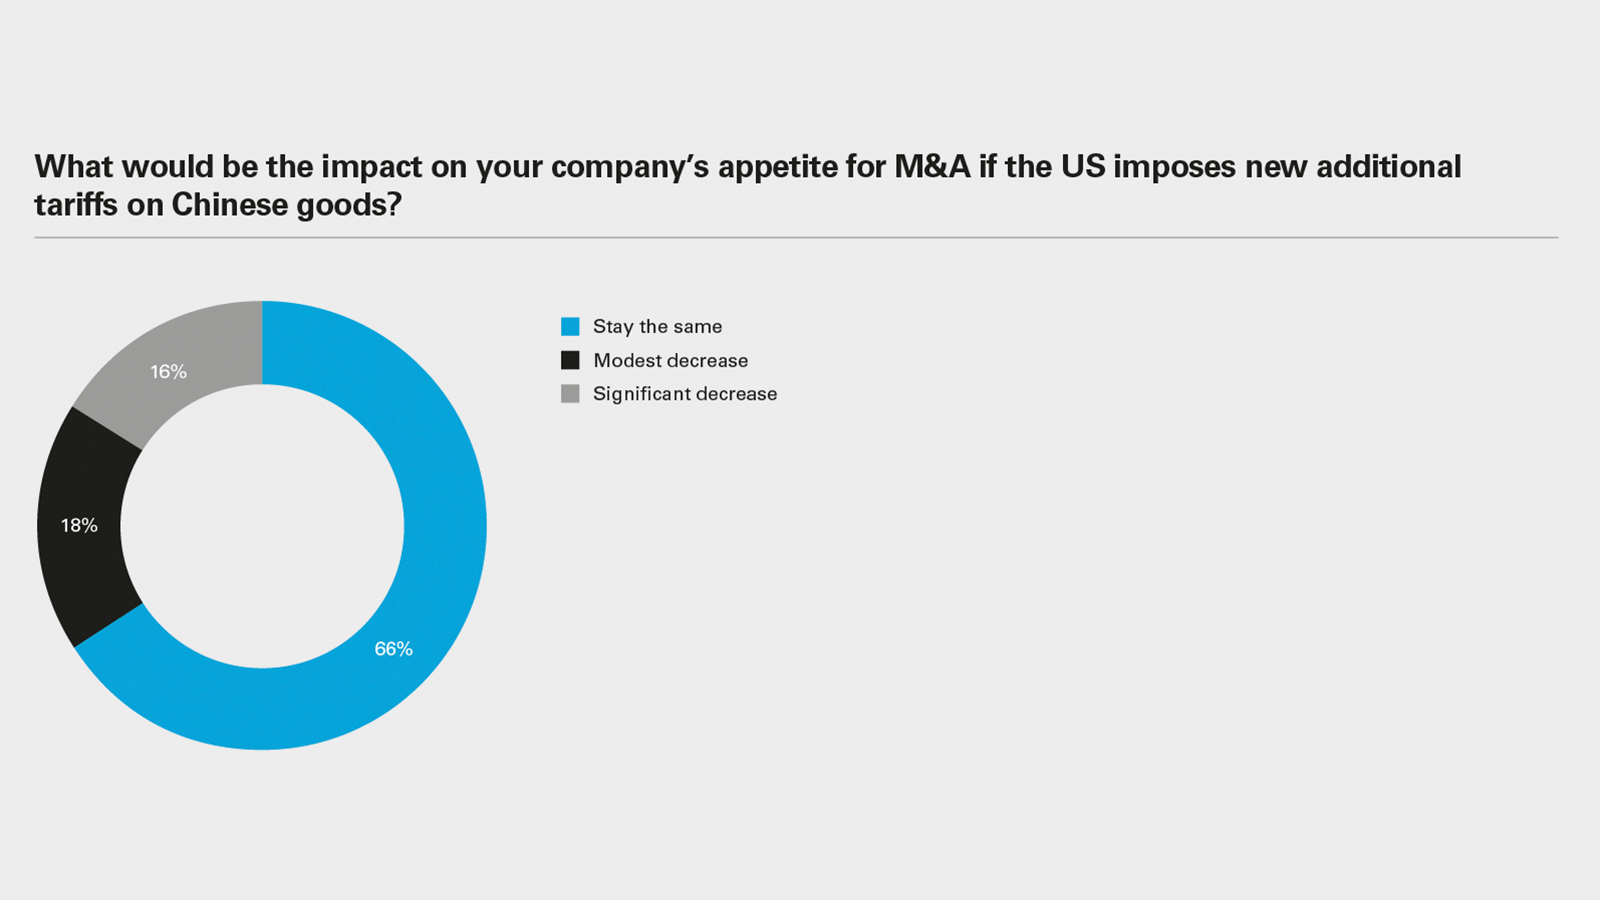 What would be the impact on your company's appetite for M&A